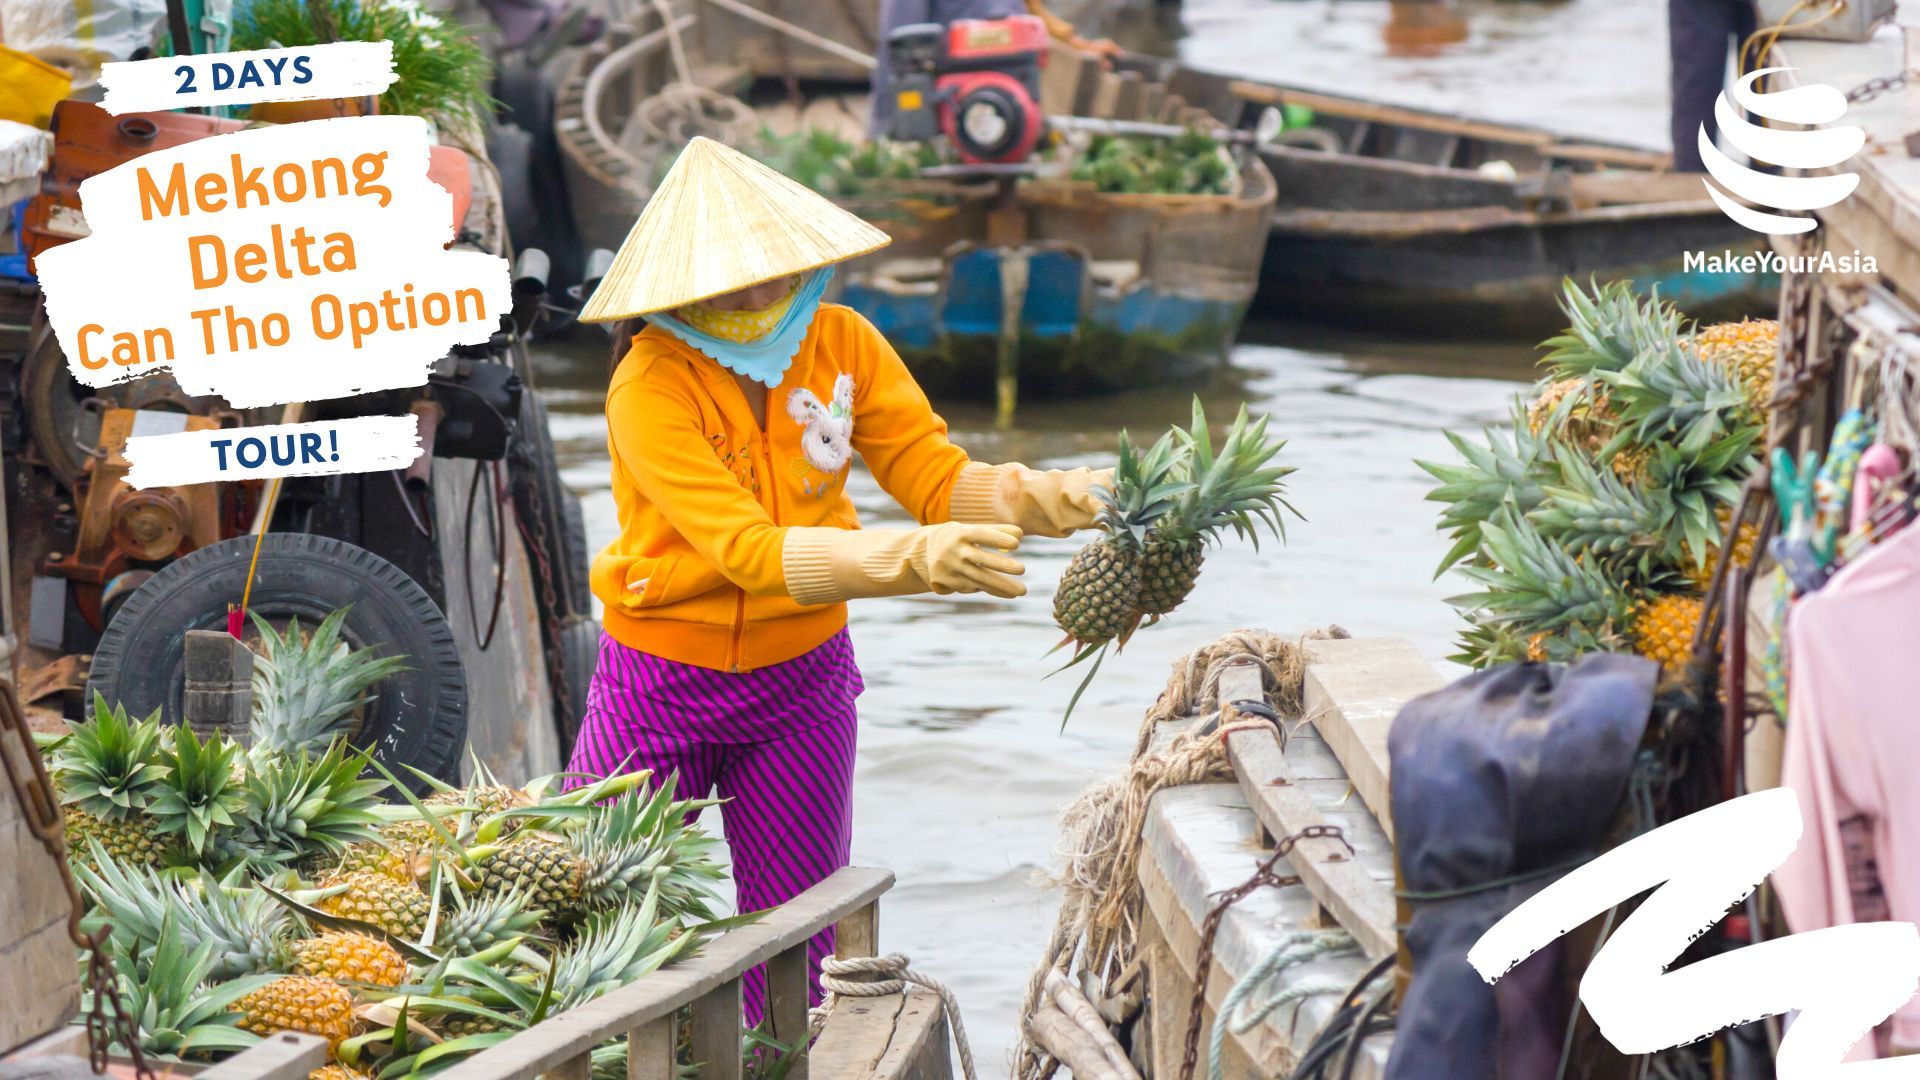 2 days Mekong Delta - Can Tho Option Tour